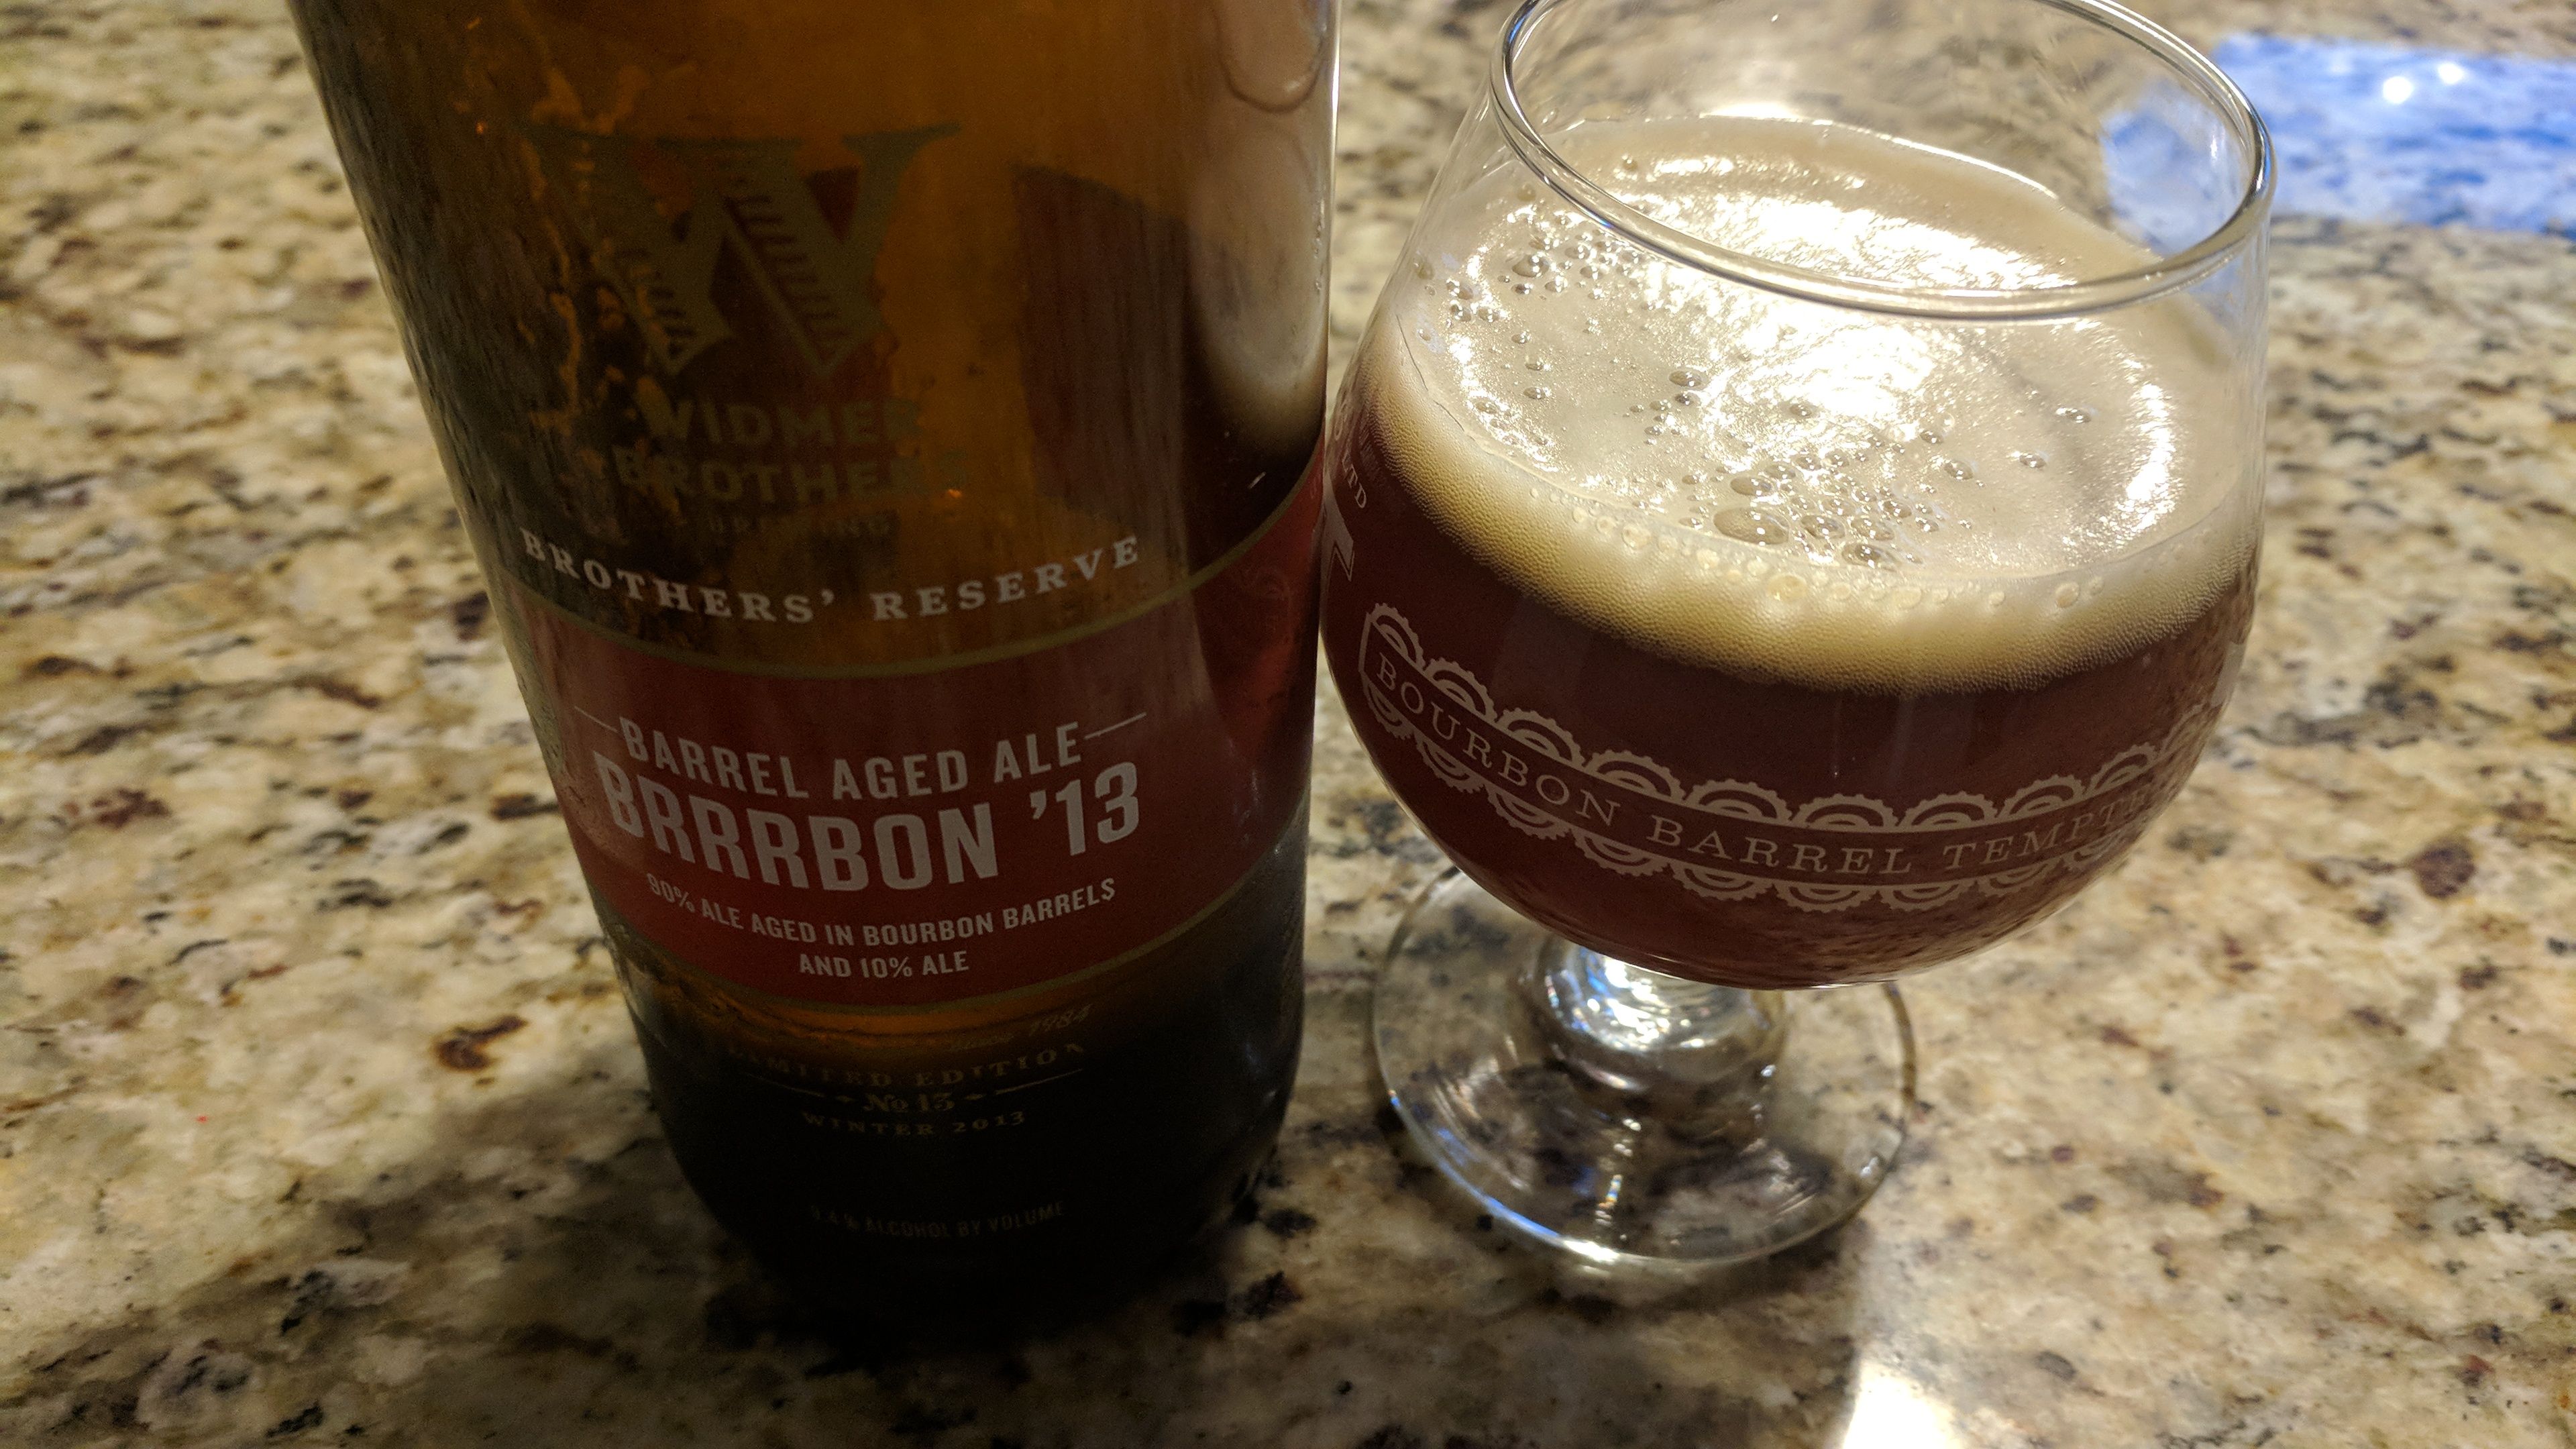 Barrel Aged Brrrbon (2013) by Widmer Brothers Brewing poured into a tulip glass